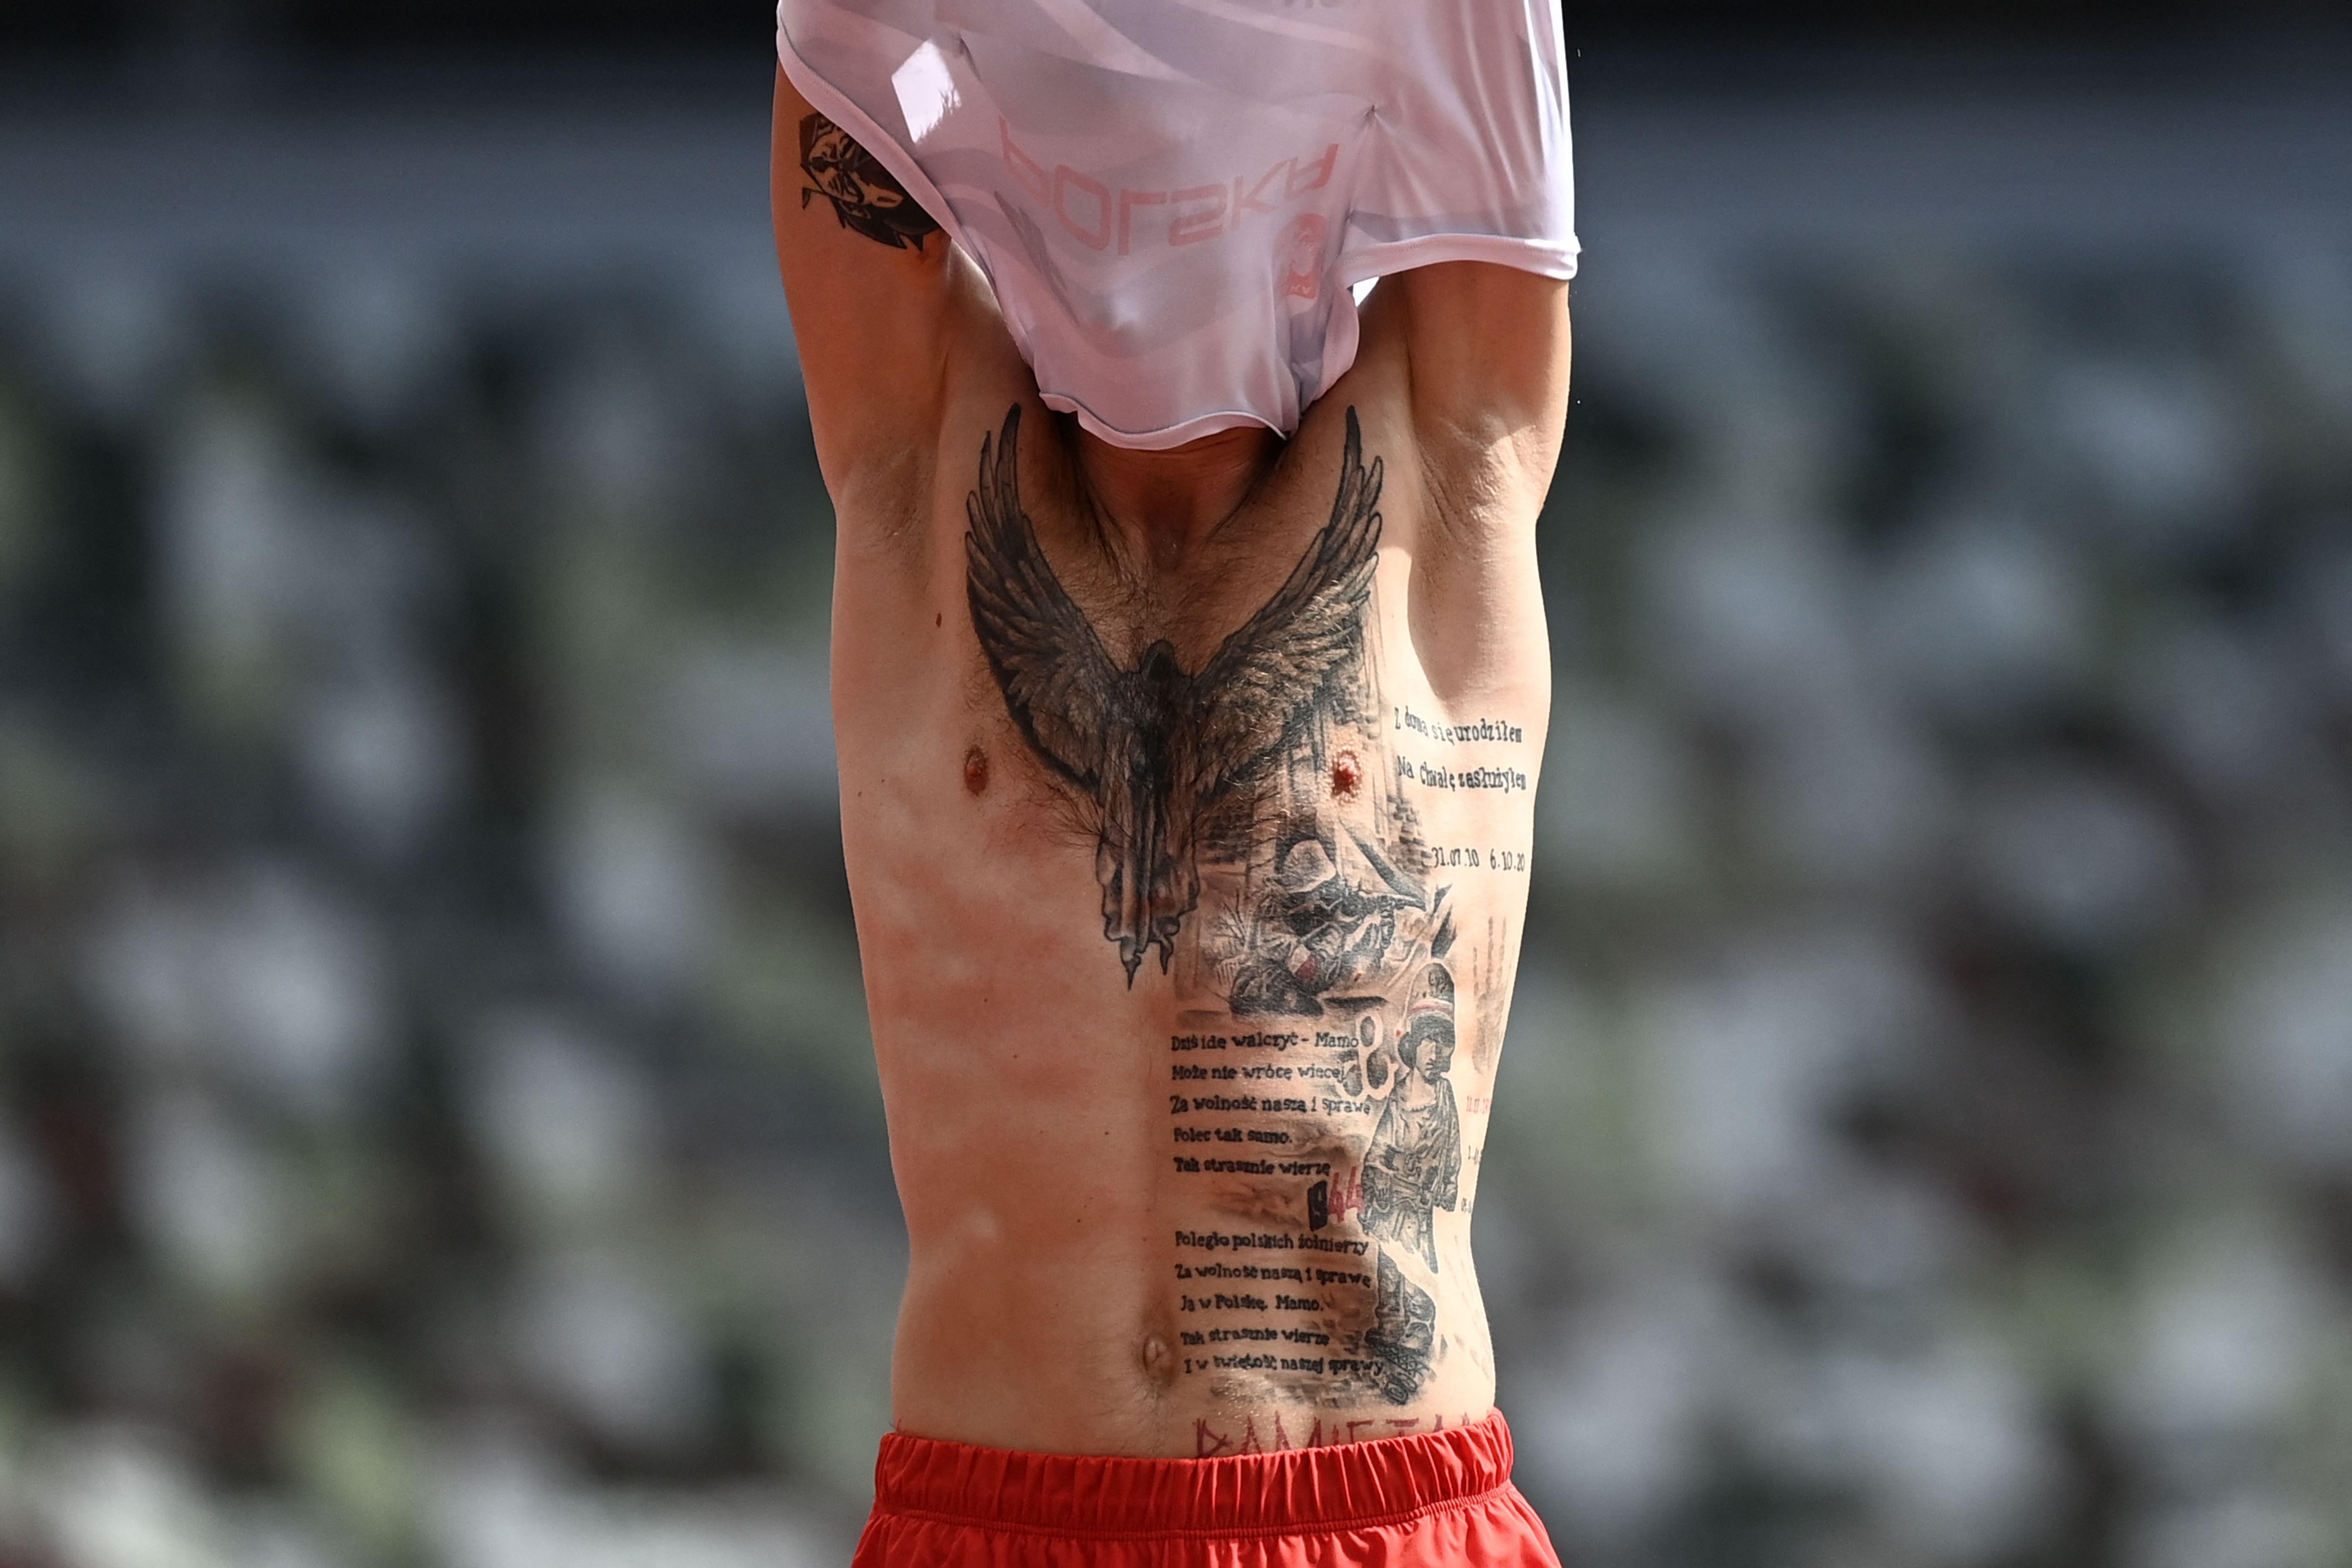 A man lifts his shirt over his head revealing extensive tattoos on his chest and abdomen, including a large bird on his chest and ample text on his stomach.